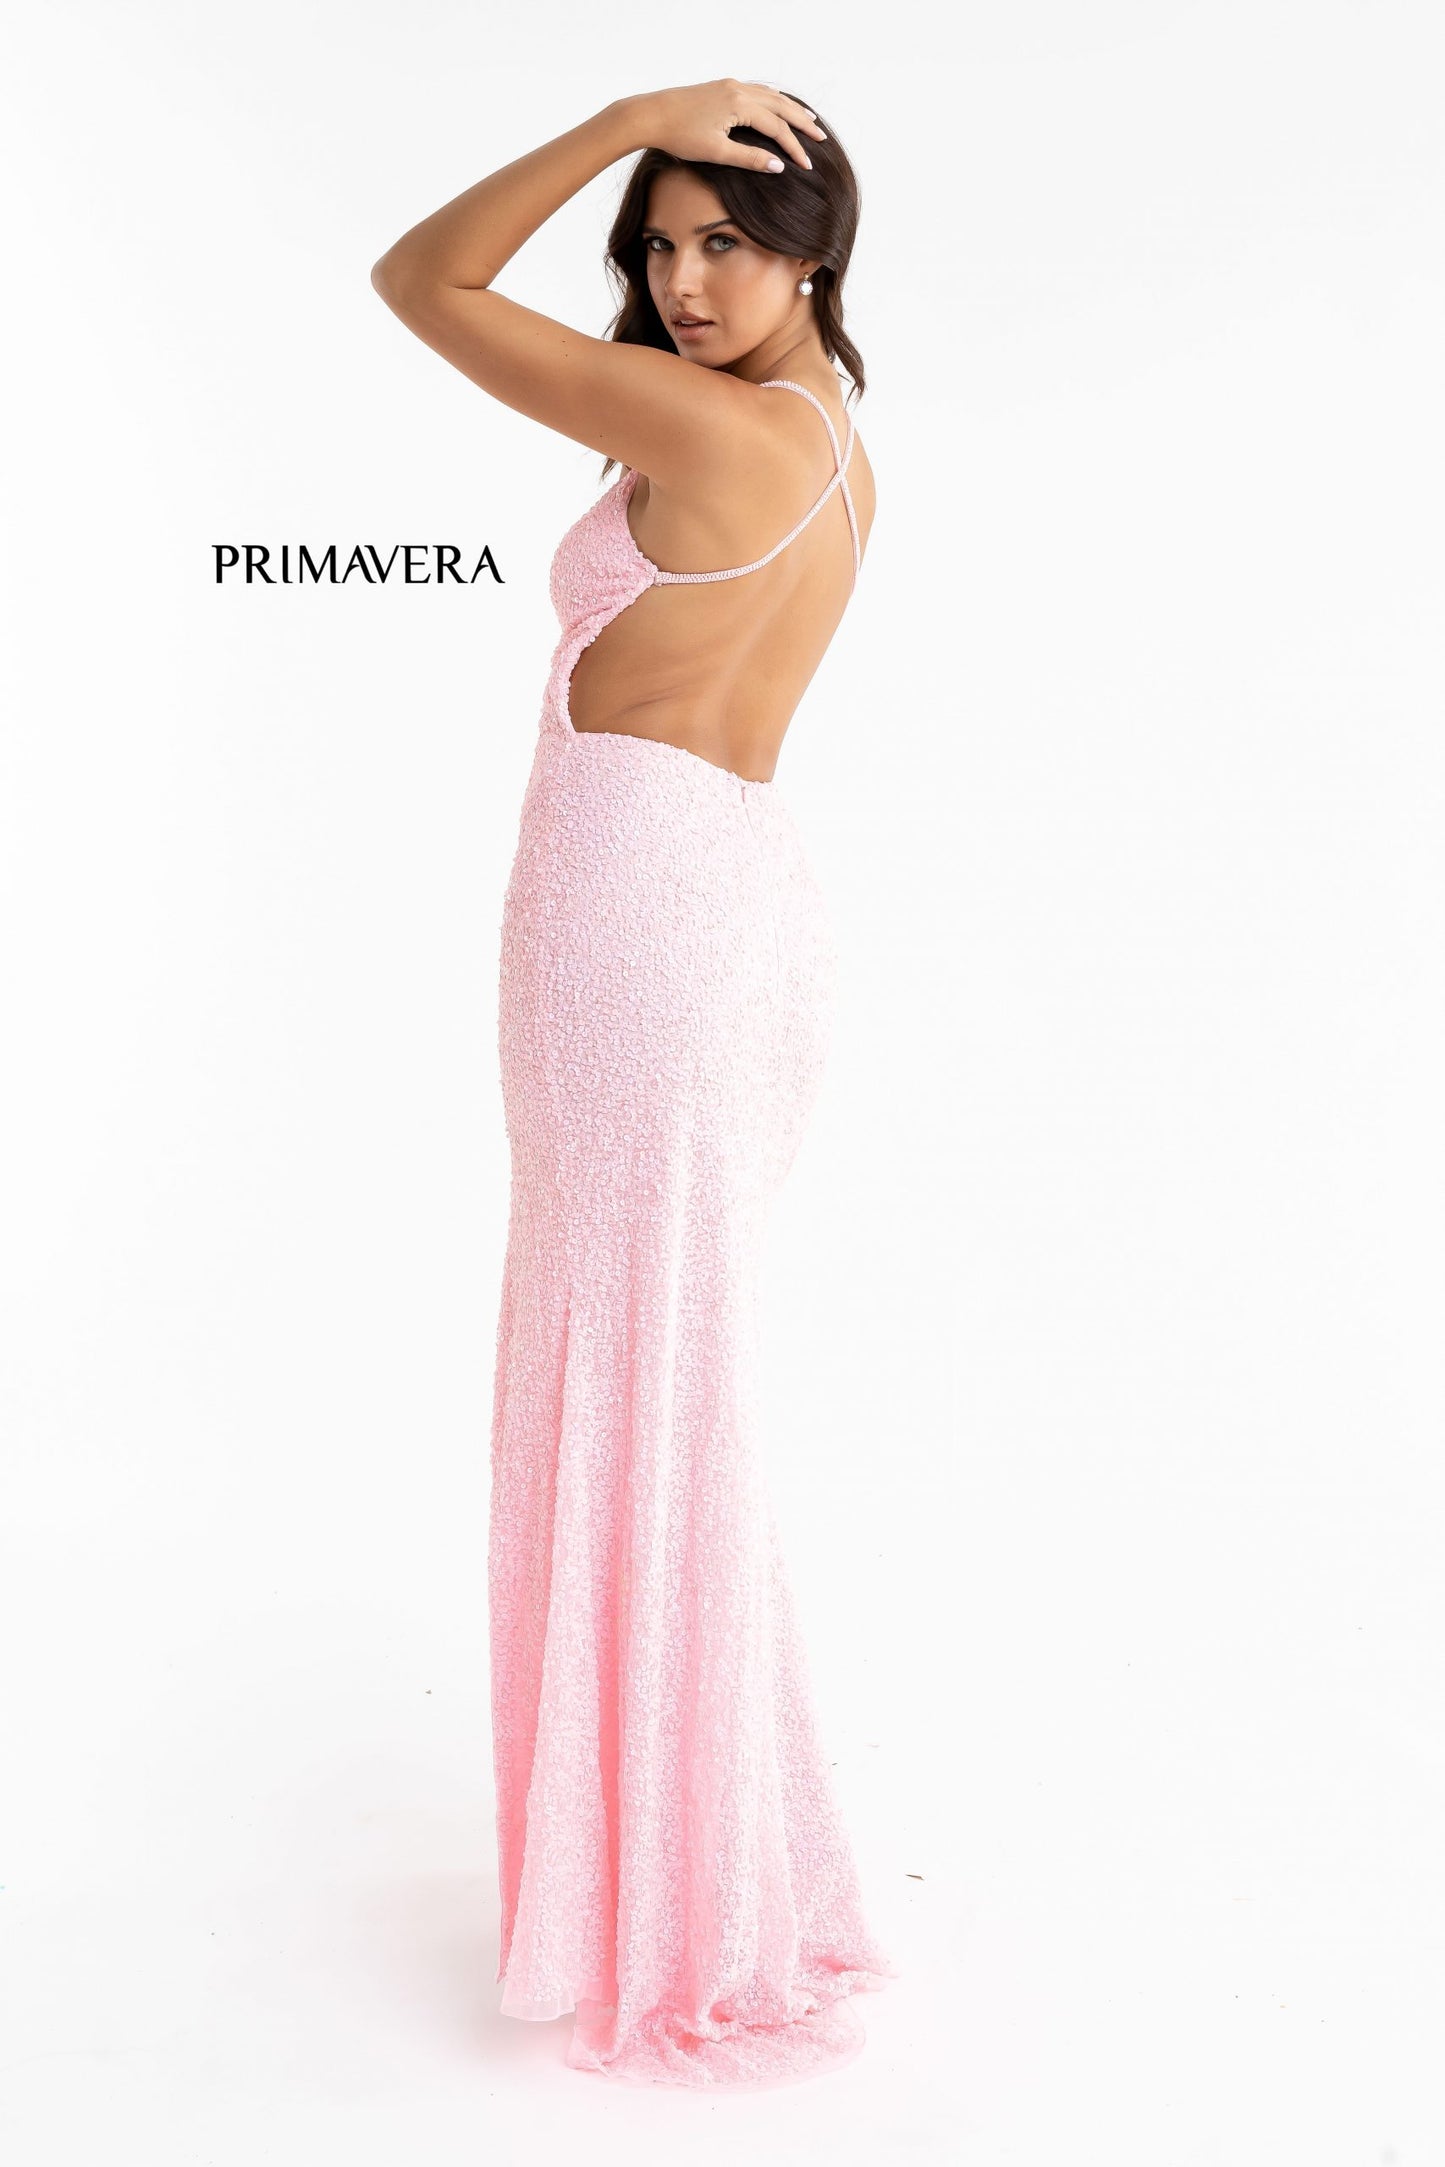 Primavera Couture 3291 Size 2 Pink Long Fitted Backless Sequin Prom Dress Formal Evening Gown